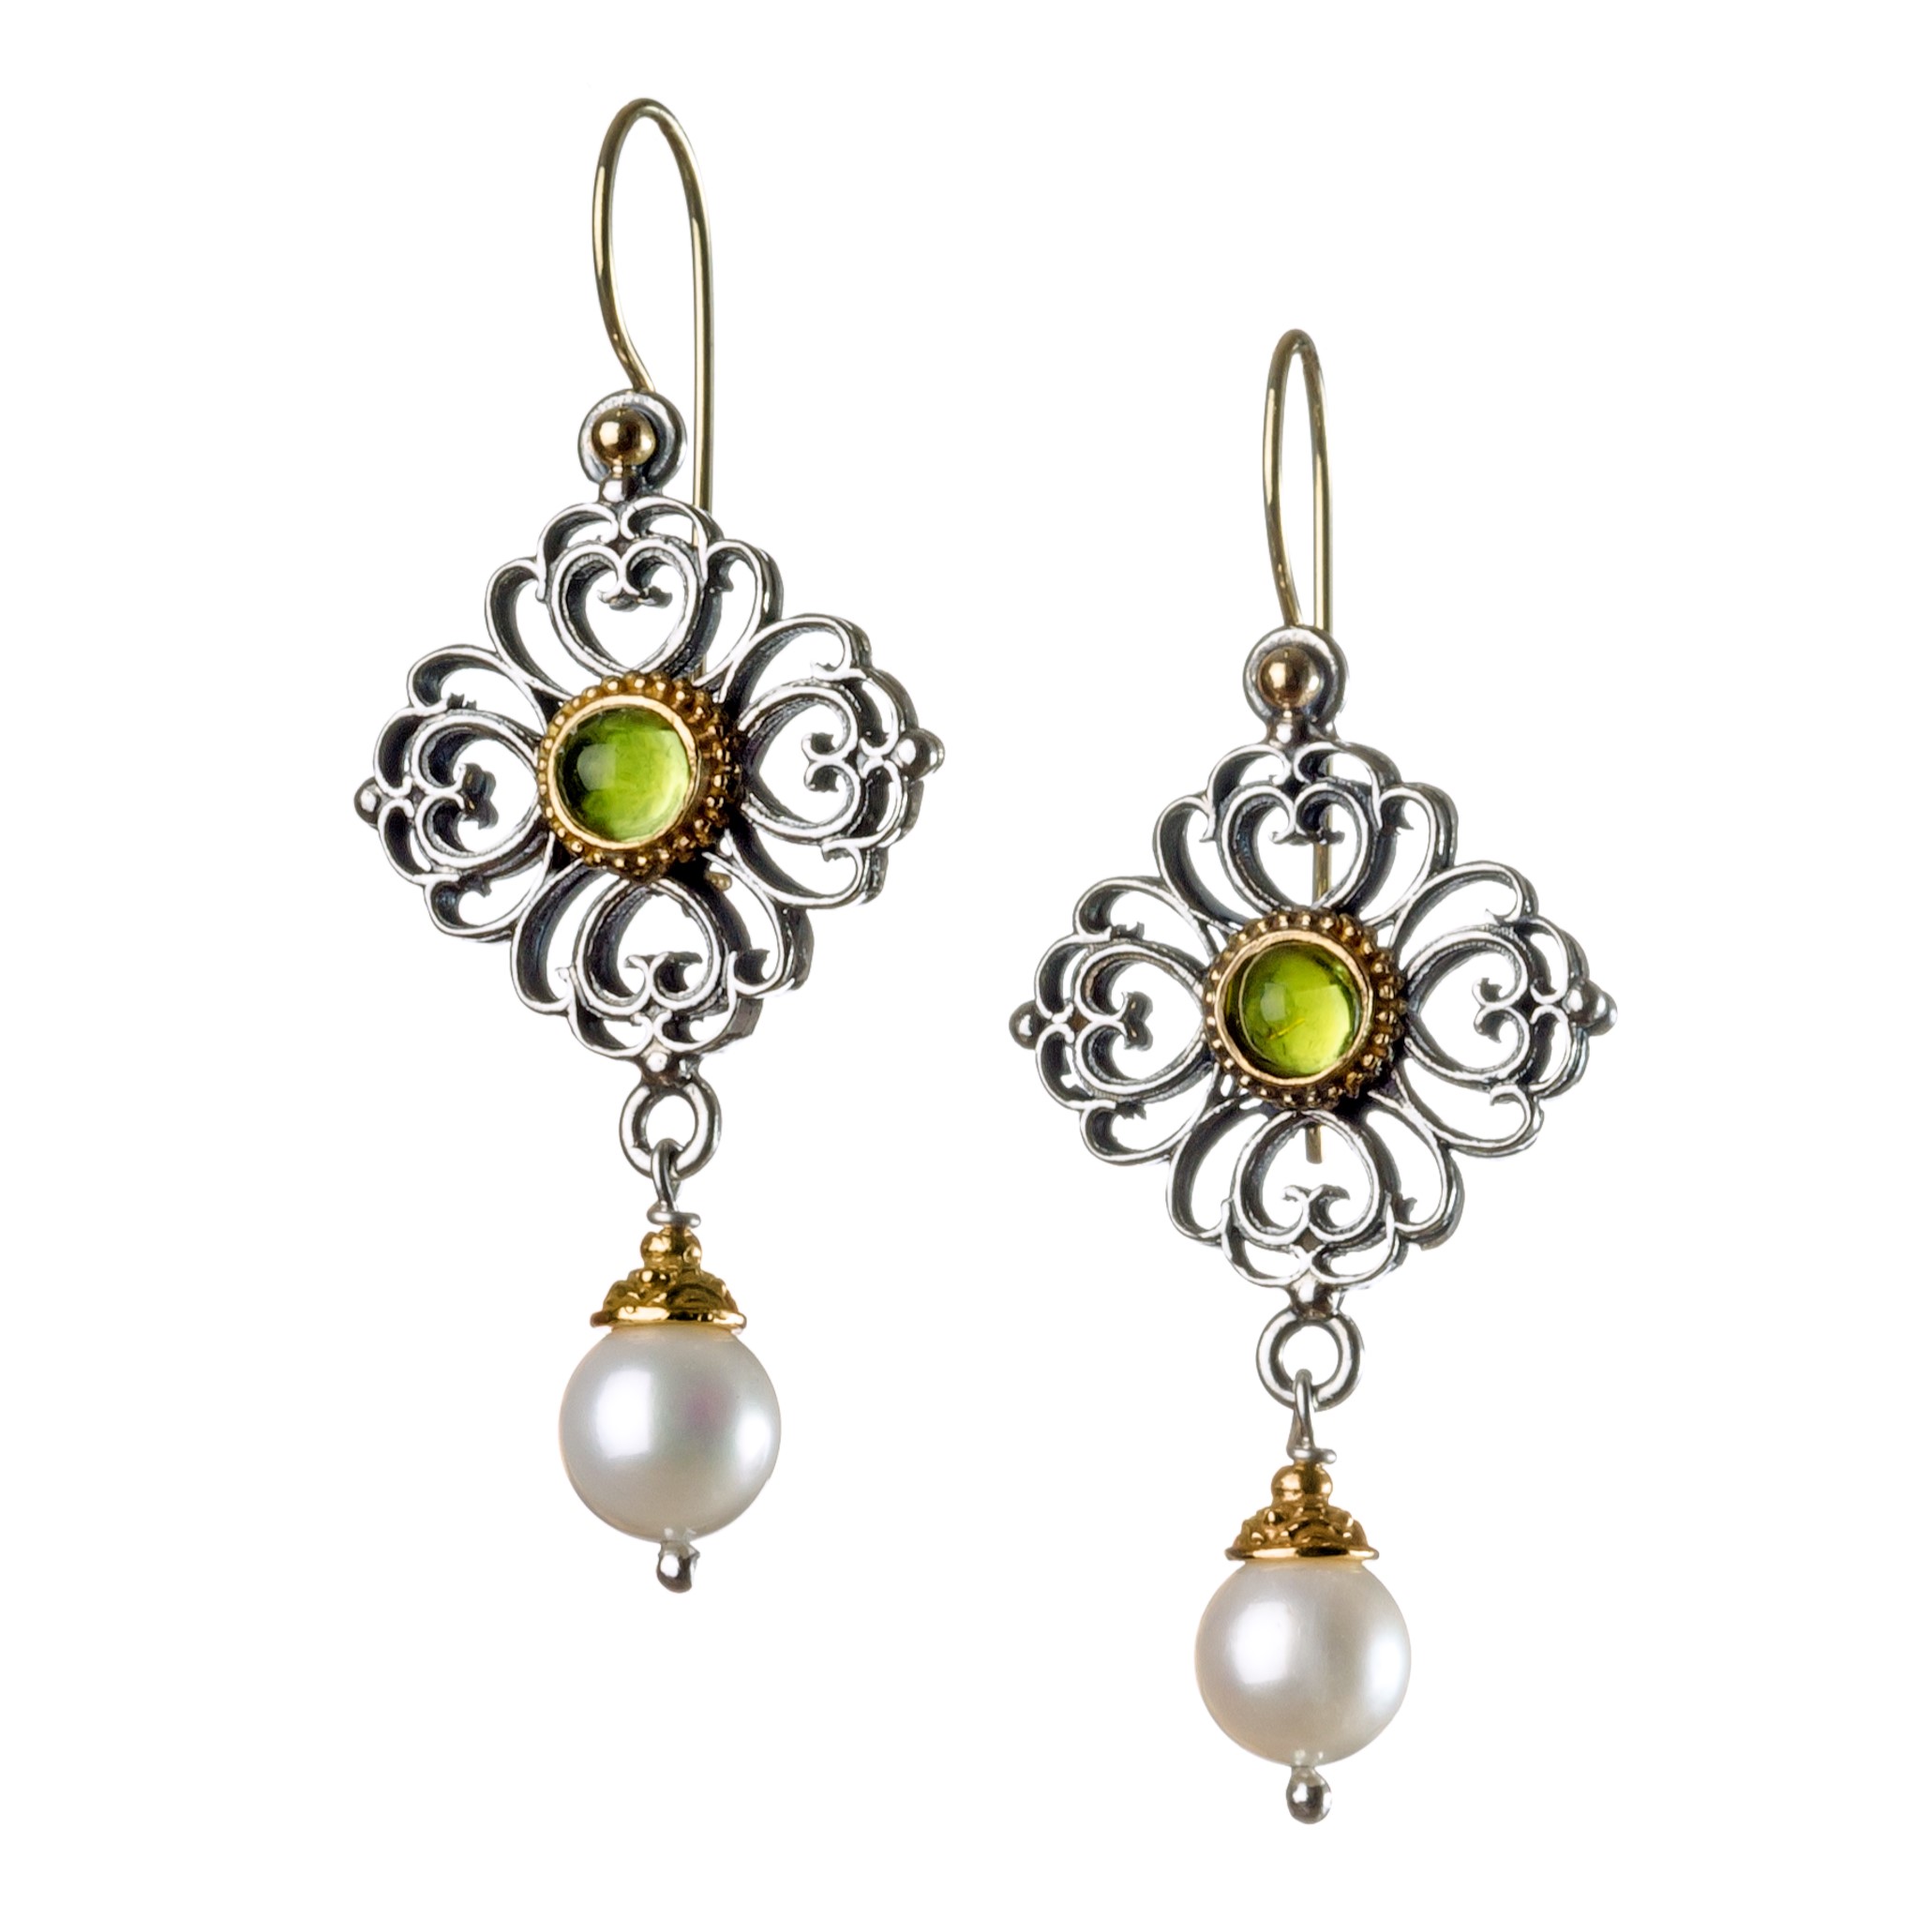 Byzantine long earrings in 18K Gold and Sterling Silver with peridot